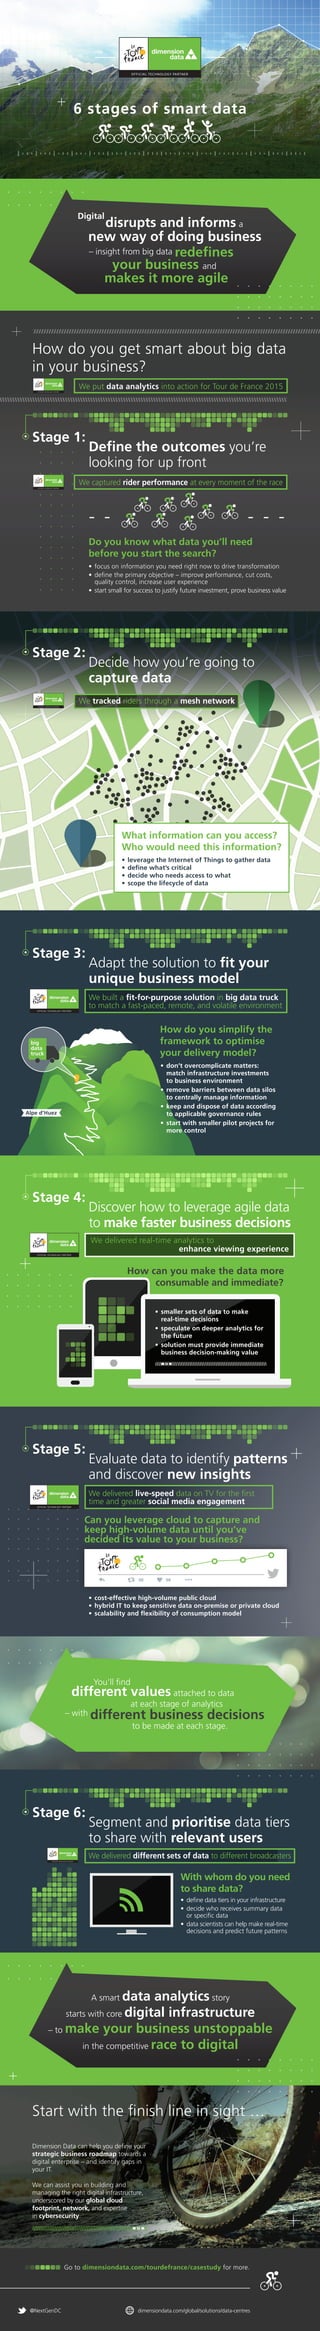 A smart data analytics story
starts with core digital infrastructure
– to make your business unstoppable
in the competitive race to digital
different values attached to data
at each stage of analytics
– with different business decisions
to be made at each stage.
6 stages of smart data
@NextGenDC dimensiondata.com/global/solutions/data-centres
Go to dimensiondata.com/tourdefrance/casestudy for more.
Dimension Data can help you define your
strategic business roadmap towards a
digital enterprise – and identify gaps in
your IT.
We can assist you in building and
managing the right digital infrastructure,
underscored by our global cloud
footprint, network, and expertise
in cybersecurity.
Digital
disrupts and informs a
new way of doing business
– insight from big data redefines
your business and
makes it more agile
How do you get smart about big data
in your business?
Do you know what data you’ll need
before you start the search?
•	focus on information you need right now to drive transformation
•	define the primary objective – improve performance, cut costs,
	 quality control, increase user experience
•	start small for success to justify future investment, prove business value
Stage 1	:	
		 Define the outcomes you’re
		 looking for up front
Stage 2	:	
		Decide how you’re going to
		capture data
What information can you access?
Who would need this information?
How do you simplify the
framework to optimise
your delivery model?
•	leverage the Internet of Things to gather data
•	define what’s critical
•	decide who needs access to what
•	scope the lifecycle of data
•	don’t overcomplicate matters:
	 match infrastructure investments
	 to business environment
•	remove barriers between data silos
	 to centrally manage information
•	keep and dispose of data according
	 to applicable governance rules
•	start with smaller pilot projects for
	 more control
Stage 3	:	
		Adapt the solution to fit your
		 unique business model
Stage 4	:	
		Discover how to leverage agile data
		to make faster business decisions
We built a fit-for-purpose solution in big data truck
to match a fast-paced, remote, and volatile environment
We delivered real-time analytics to
enhance viewing experience
Alpe d’Huez
big
data
truck
How can you make the data more
consumable and immediate?
•	smaller sets of data to make
	 real-time decisions
•	speculate on deeper analytics for
	 the future
•	solution must provide immediate
	 business decision-making value
Stage 5	:	
		Evaluate data to identify patterns
		and discover new insights
We delivered live-speed data on TV for the first
time and greater social media engagement
Can you leverage cloud to capture and
keep high-volume data until you’ve
decided its value to your business?
•	cost-effective high-volume public cloud
•	hybrid IT to keep sensitive data on-premise or private cloud
•	scalability and flexibility of consumption model
You’ll find
Stage 6	:	
		Segment and prioritise data tiers
		 to share with relevant users
We delivered different sets of data to different broadcasters
With whom do you need
to share data?
•	 define data tiers in your infrastructure
•	decide who receives summary data
	 or specific data
•	 data scientists can help make real-time
	 decisions and predict future patterns
Start with the finish line in sight …
We captured rider performance at every moment of the race
We put data analytics into action for Tour de France 2015
We tracked riders through a mesh network
 